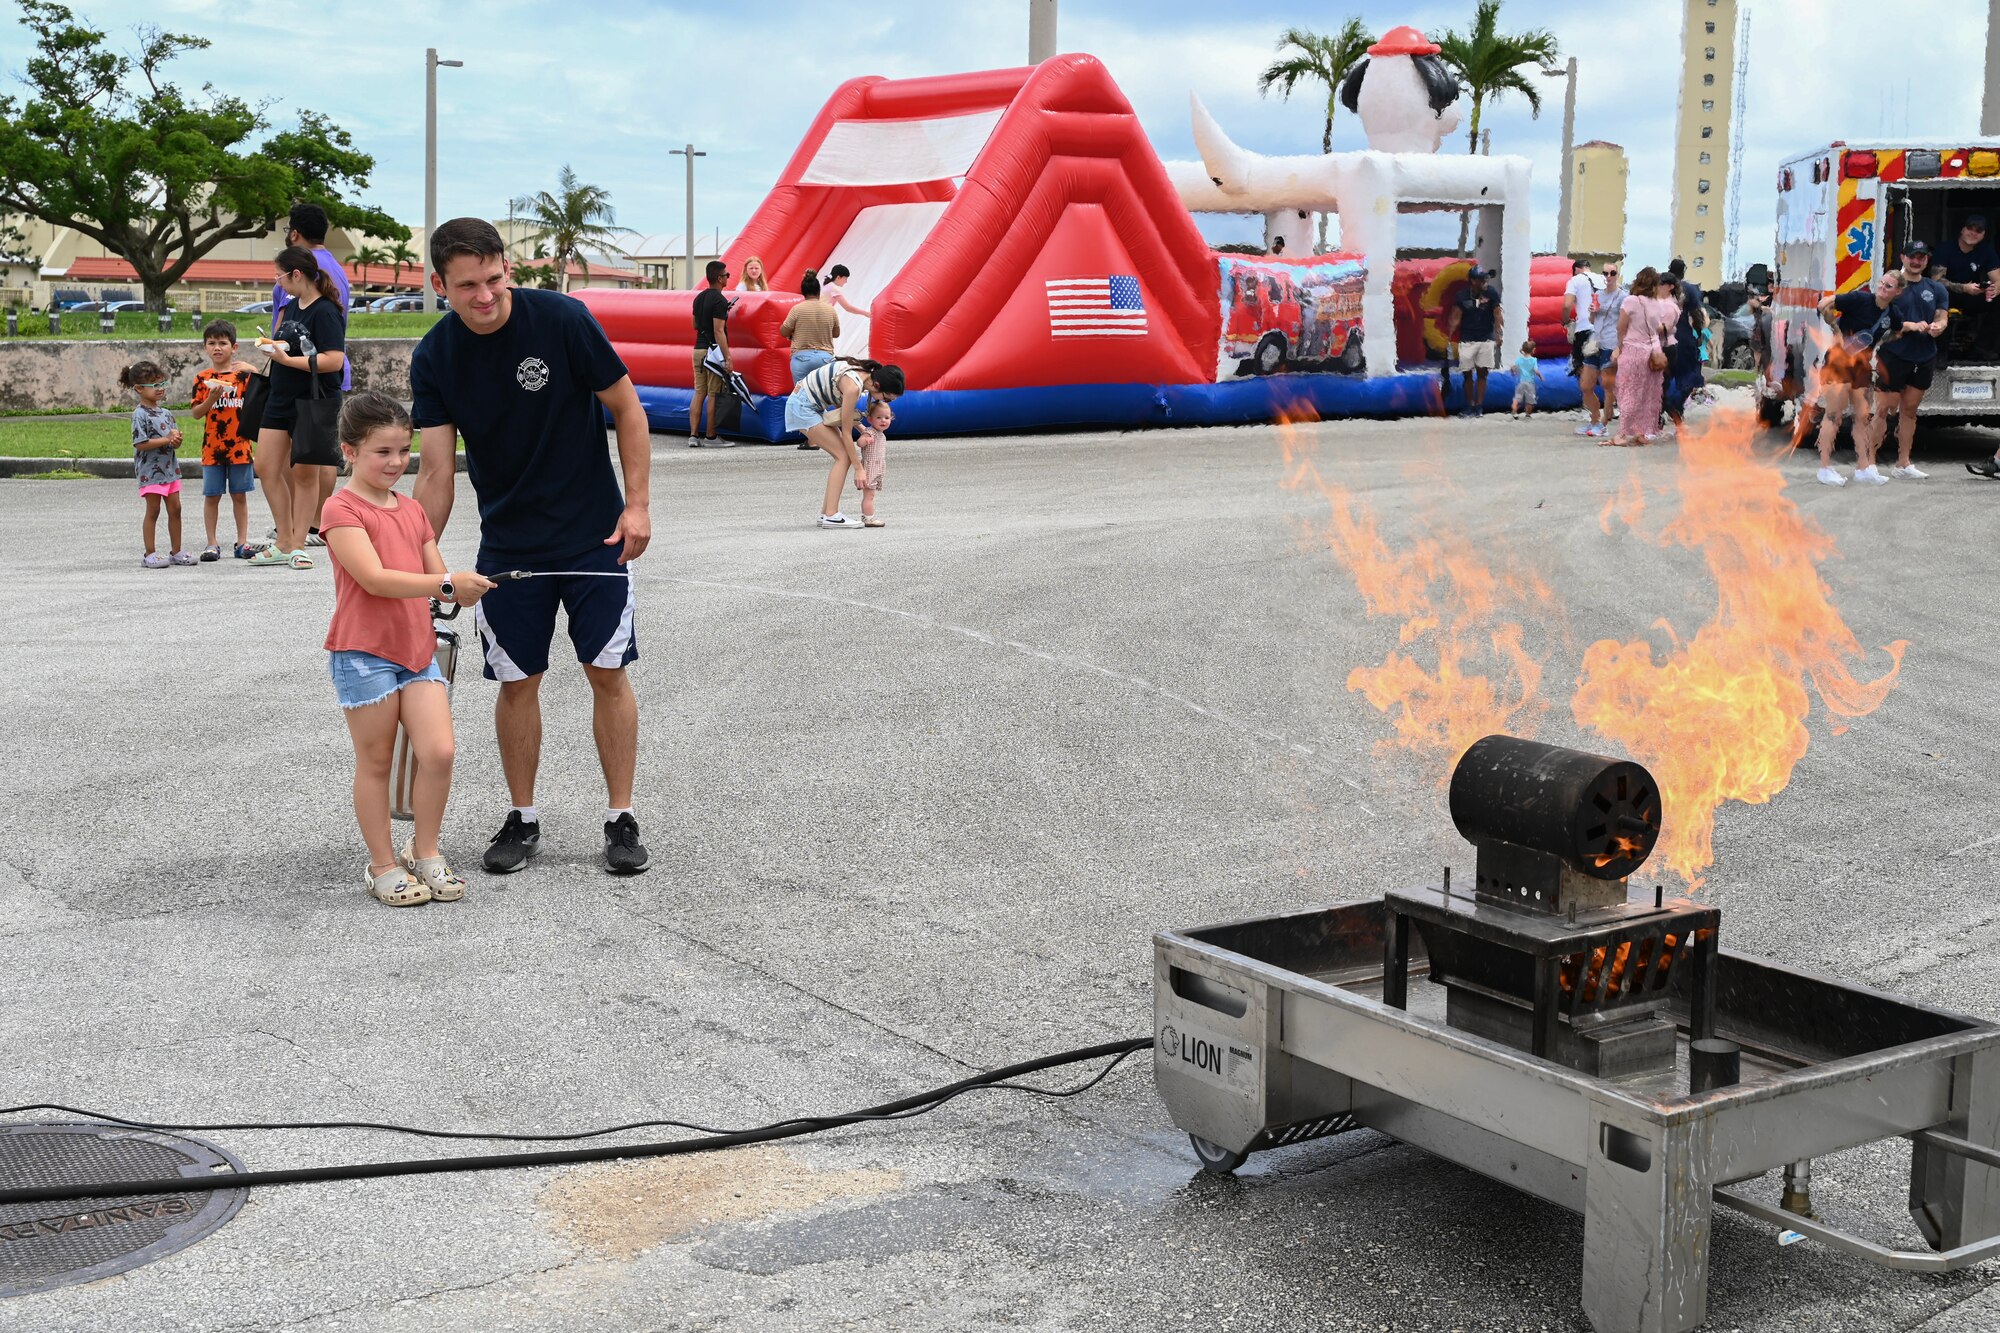 A fire inspector assists a child with taking out a simulated fire with fire extinguisher.